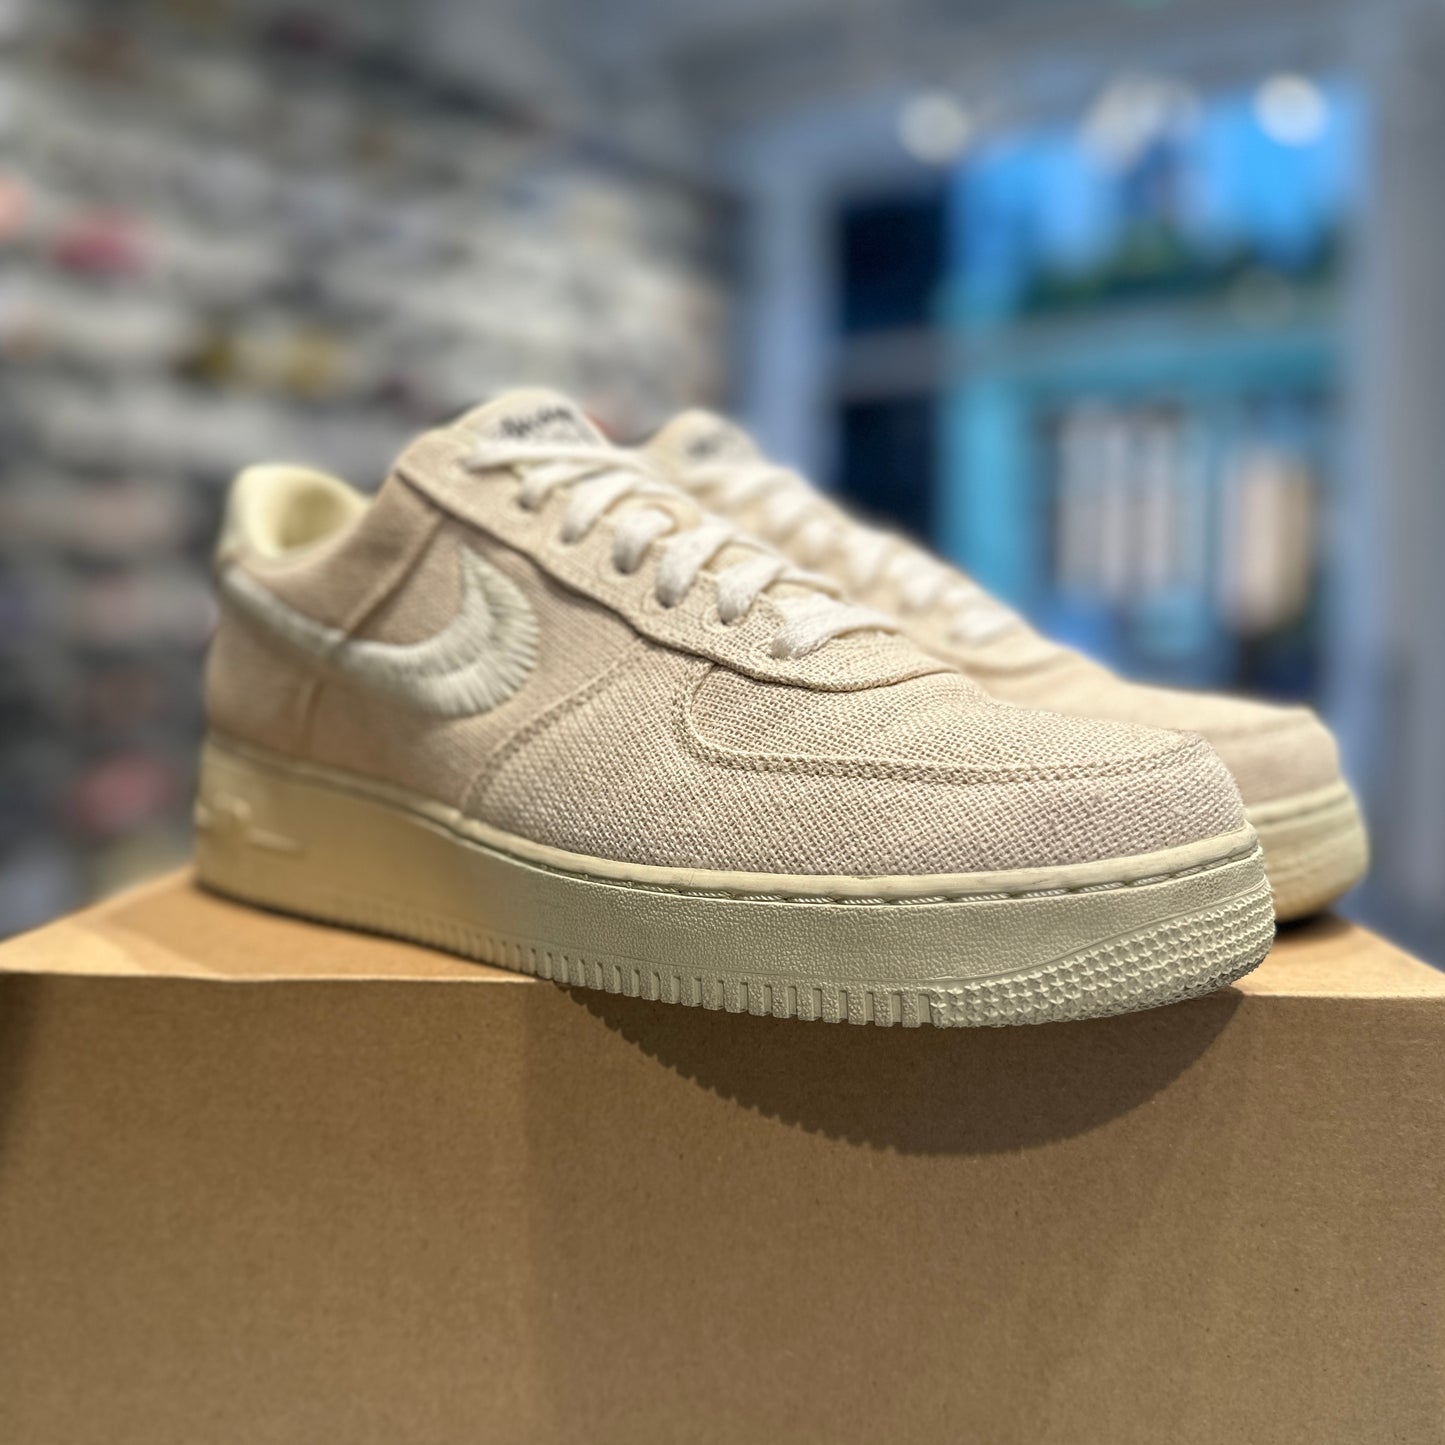 Nike Air Force 1 Low Stussy 'Fossil' UK9 (No Box)